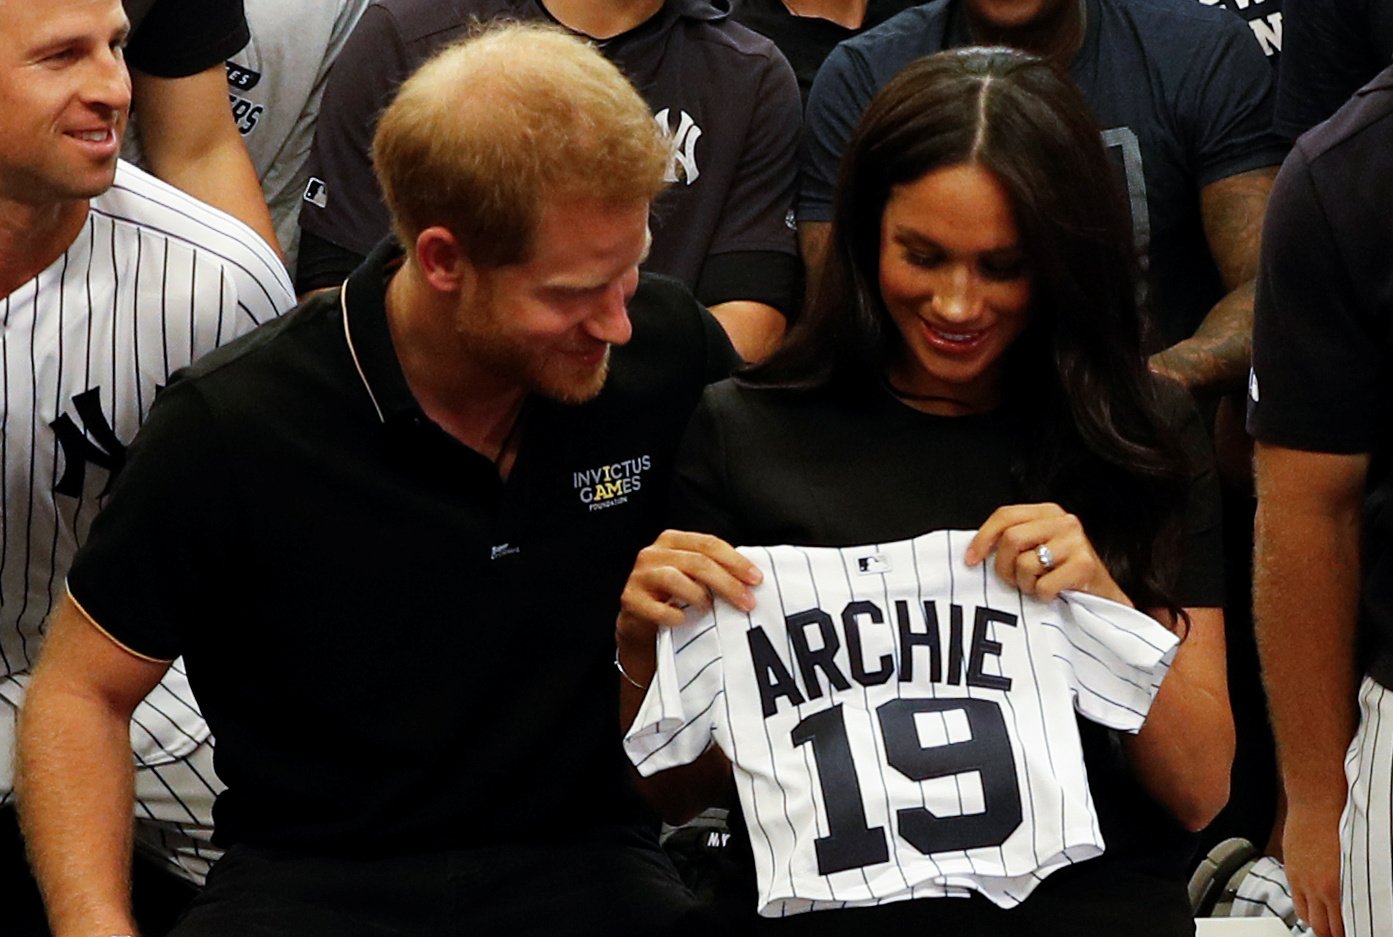 Prince Harry, Duke of Sussex, and his wife Meghan, Duchess of Sussex presented with gifts for their newborn son Archie at the London Stadium on June 29, 2019 in Queen Elizabeth Olympic Park, London. / Source: Getty Images